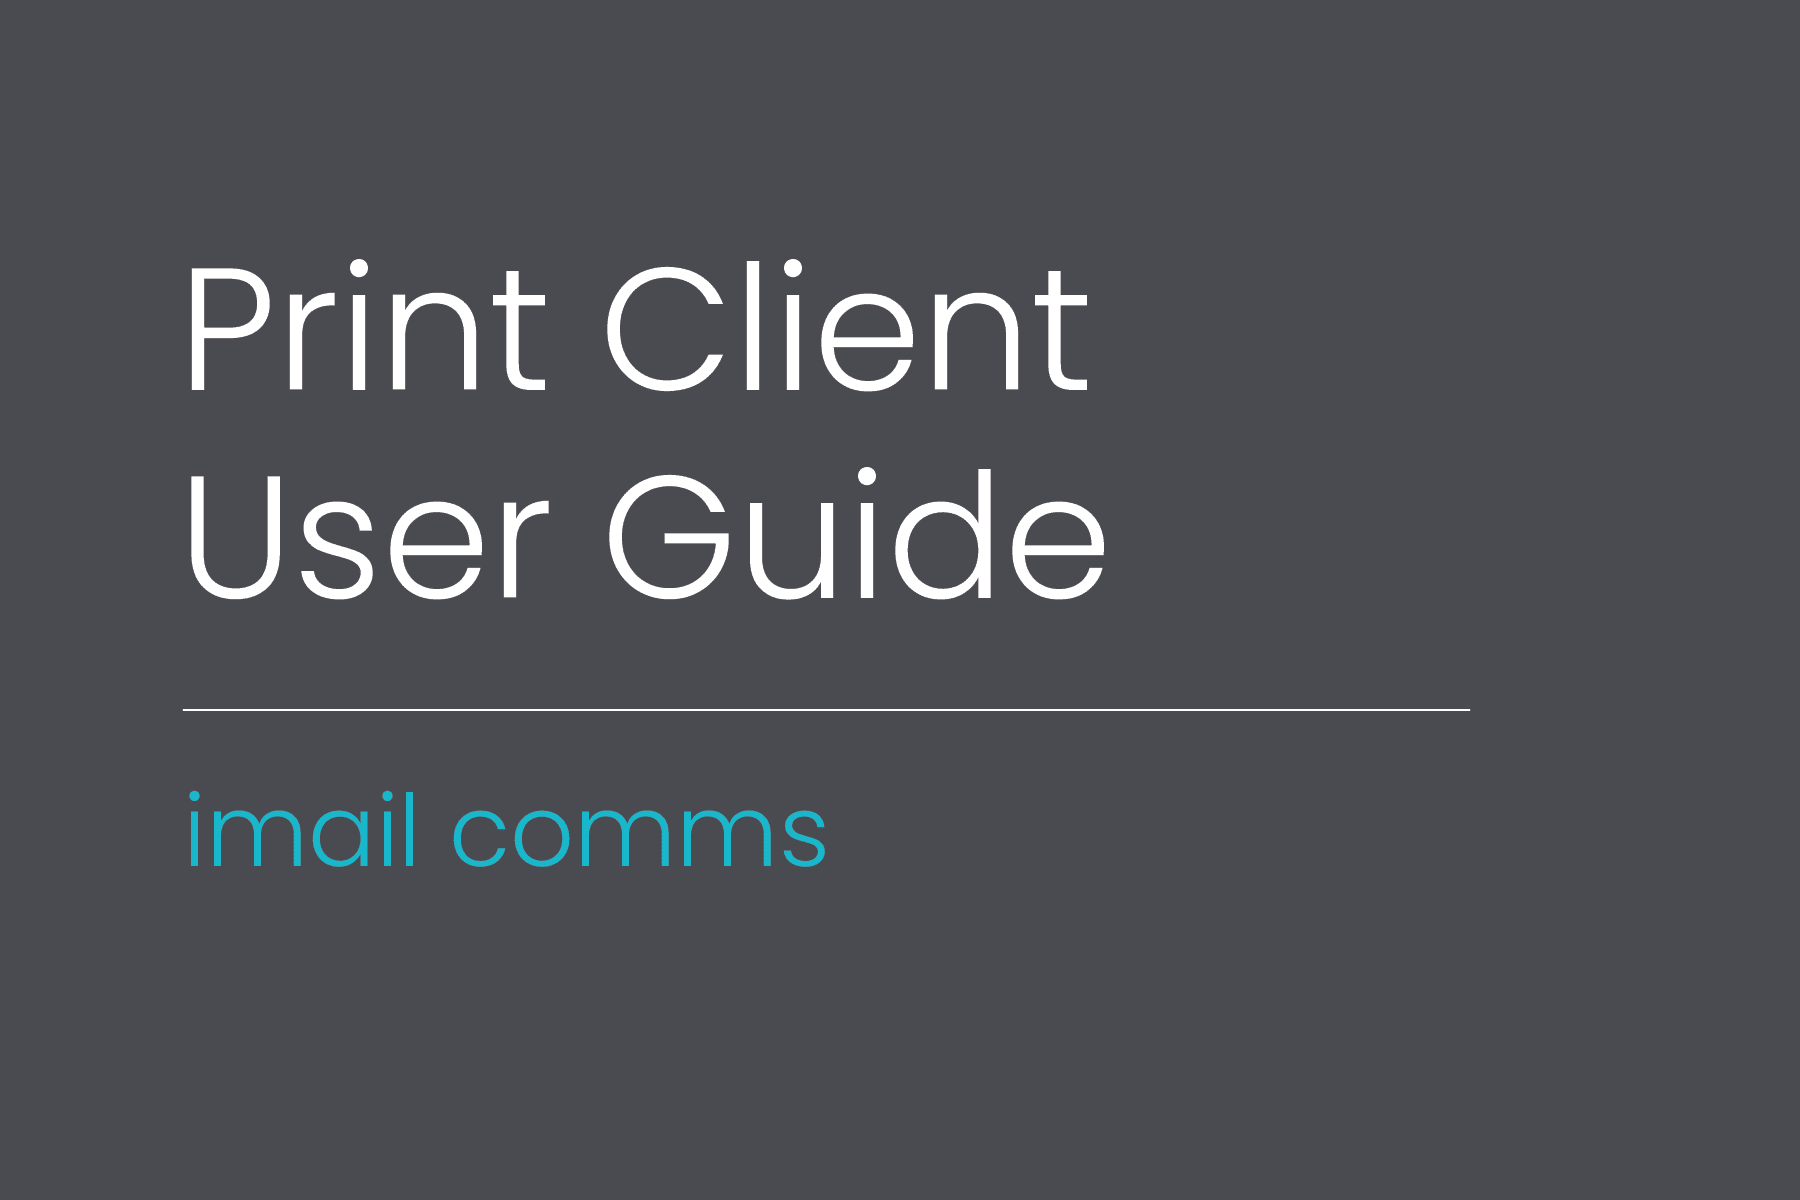 Print Client User Guide